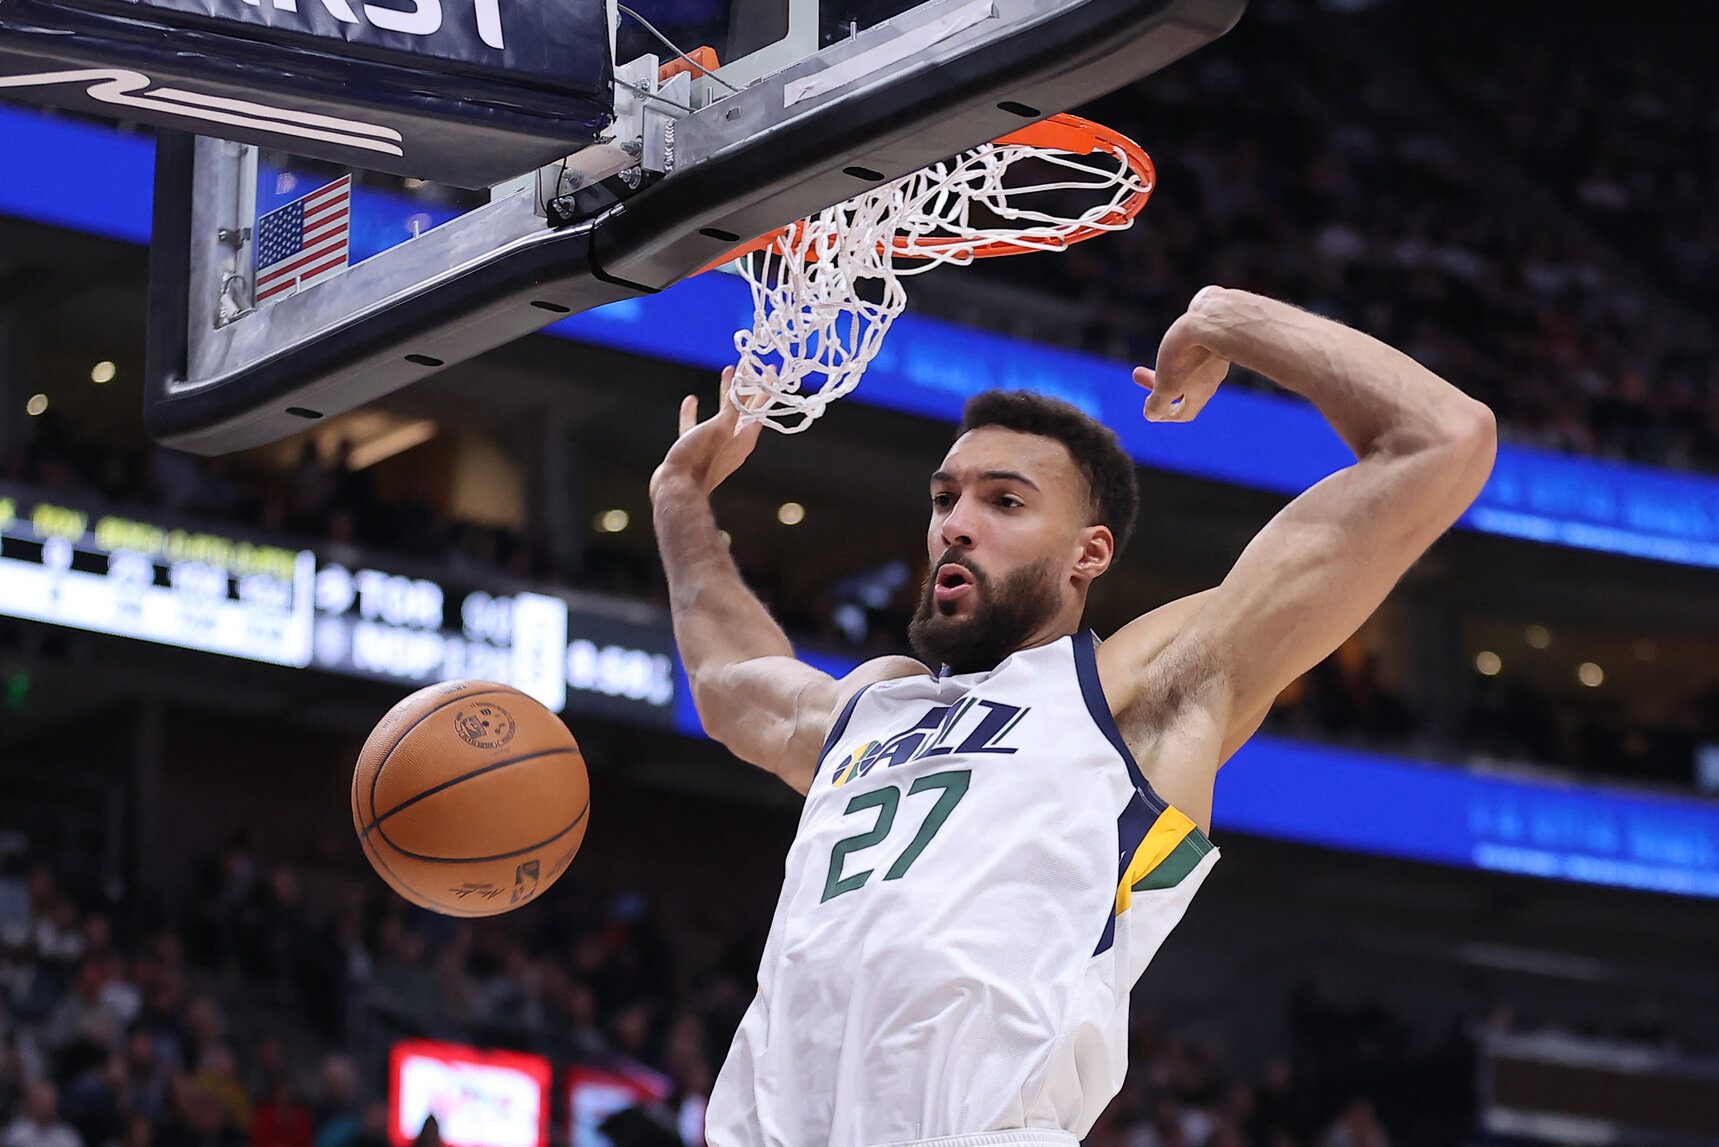 Twin towers: Minnesota pairs Gobert with Towns in blockbuster trade